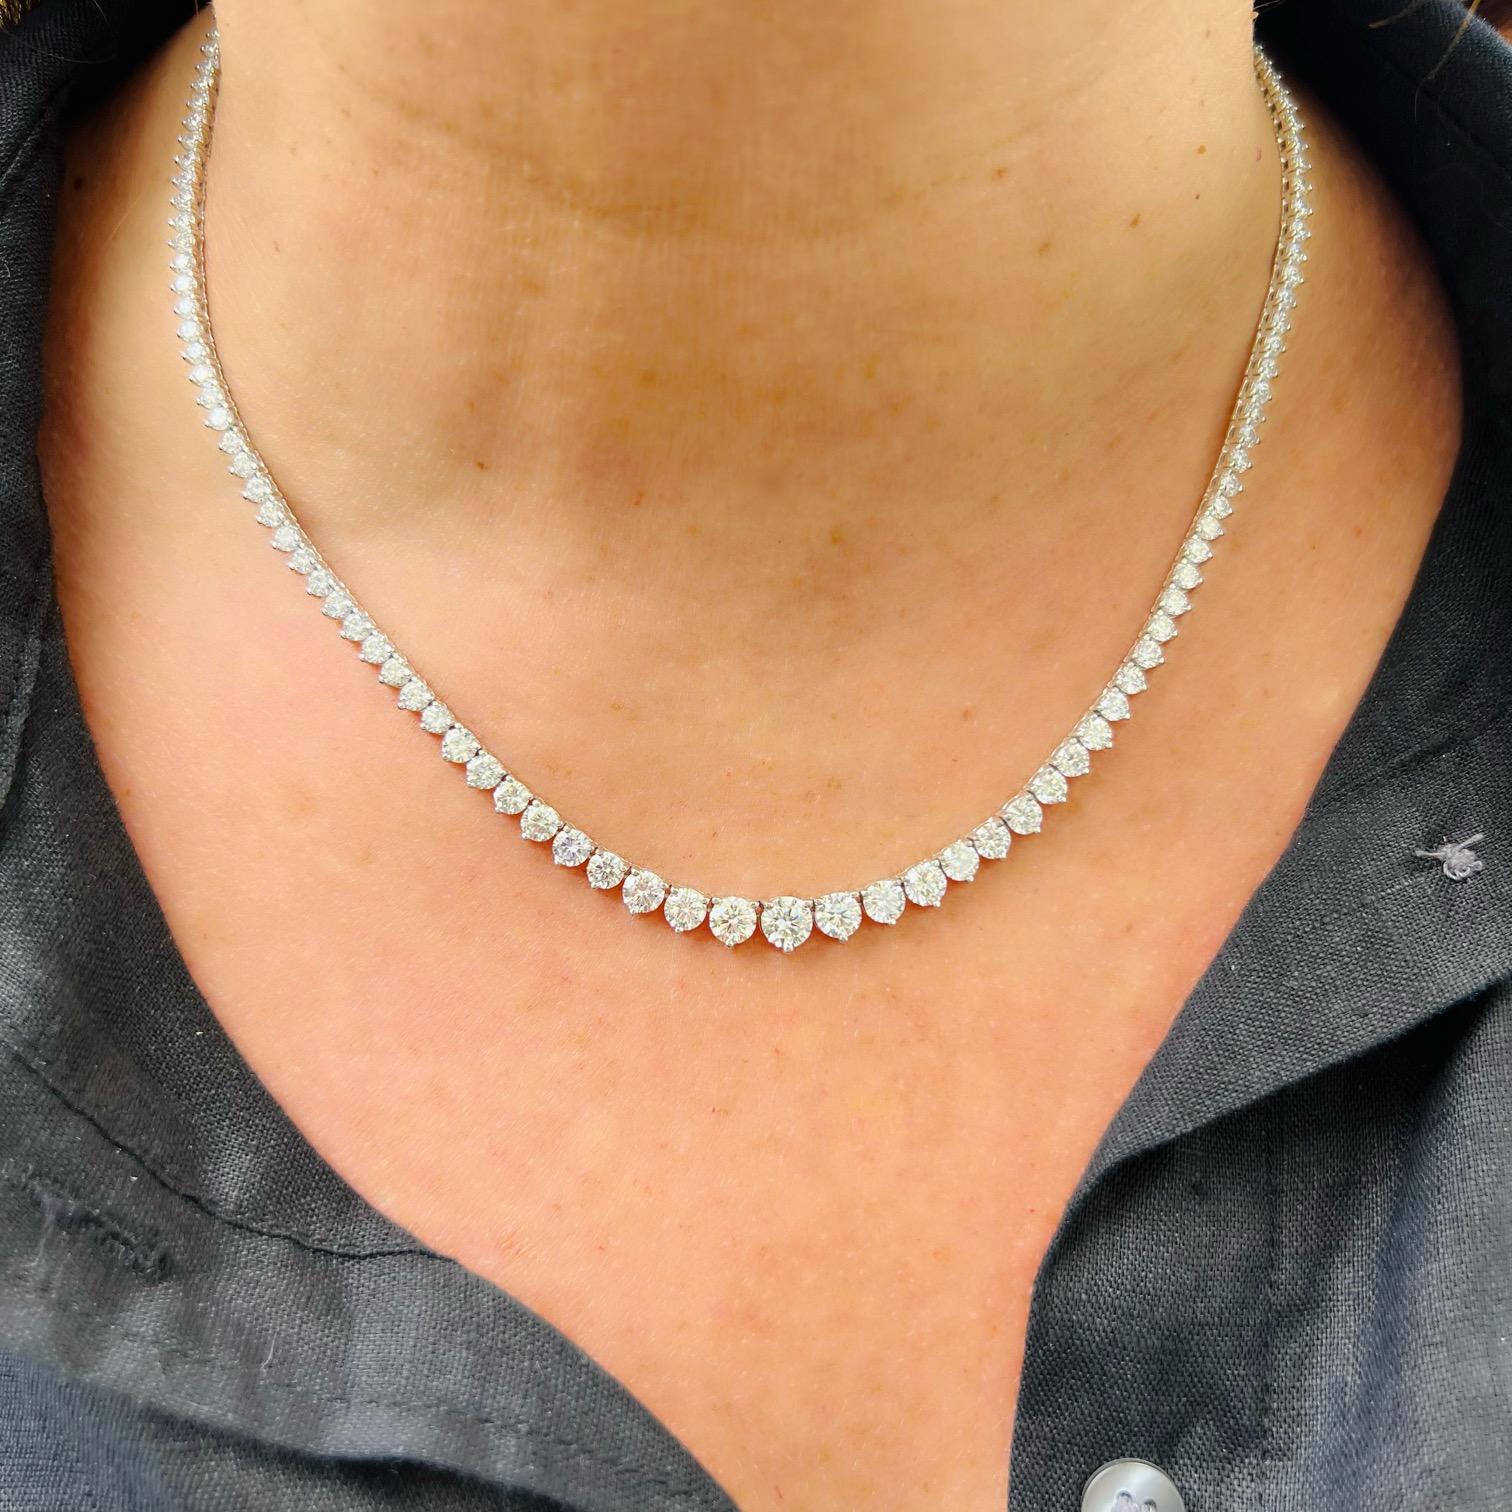 A versatile piece that is sure to turn heads, this 18 karat white gold diamond line necklace is an absolute beauty. Featuring 145 fine natural diamonds for 14.82 carats total weight, the diamonds in this piece match exceptionally well and delivery